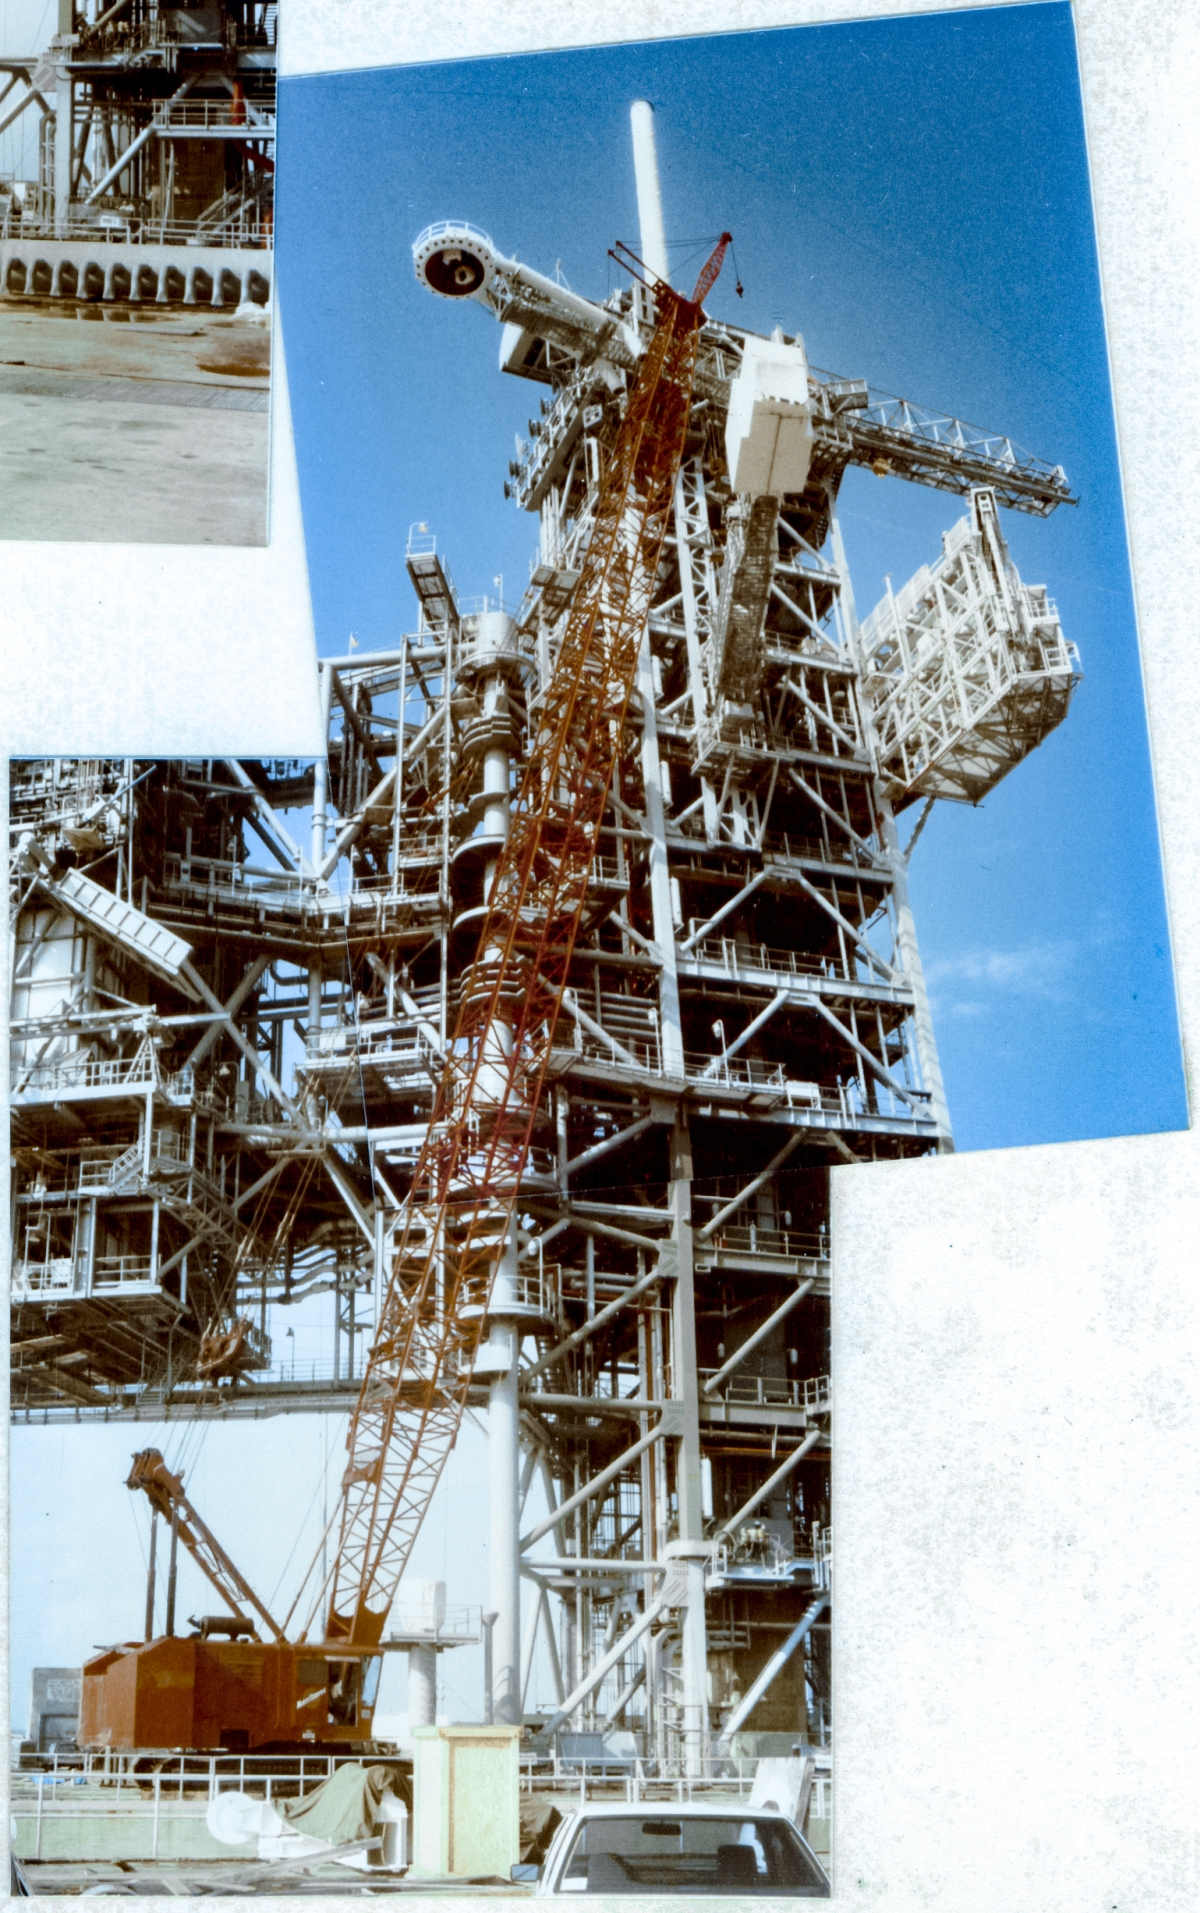 In this view, you can see that the Orbiter Access Arm has been lifted all the way up to its final elevation, between the 200' and 220' framing steel levels on the FSS, and now the ticklish work of maneuvering an object that weighs over 50,000 pounds up against the steel that will support it, to within less than a centimeter of allowable error, in a way that causes it to come in contact with its support steel softly, safely, and without causing any damage. This is virtuoso work, orchestrated perfectly by the crane operator and ironworkers, all of whom perform at world-class level in the pursuance of their respective crafts.